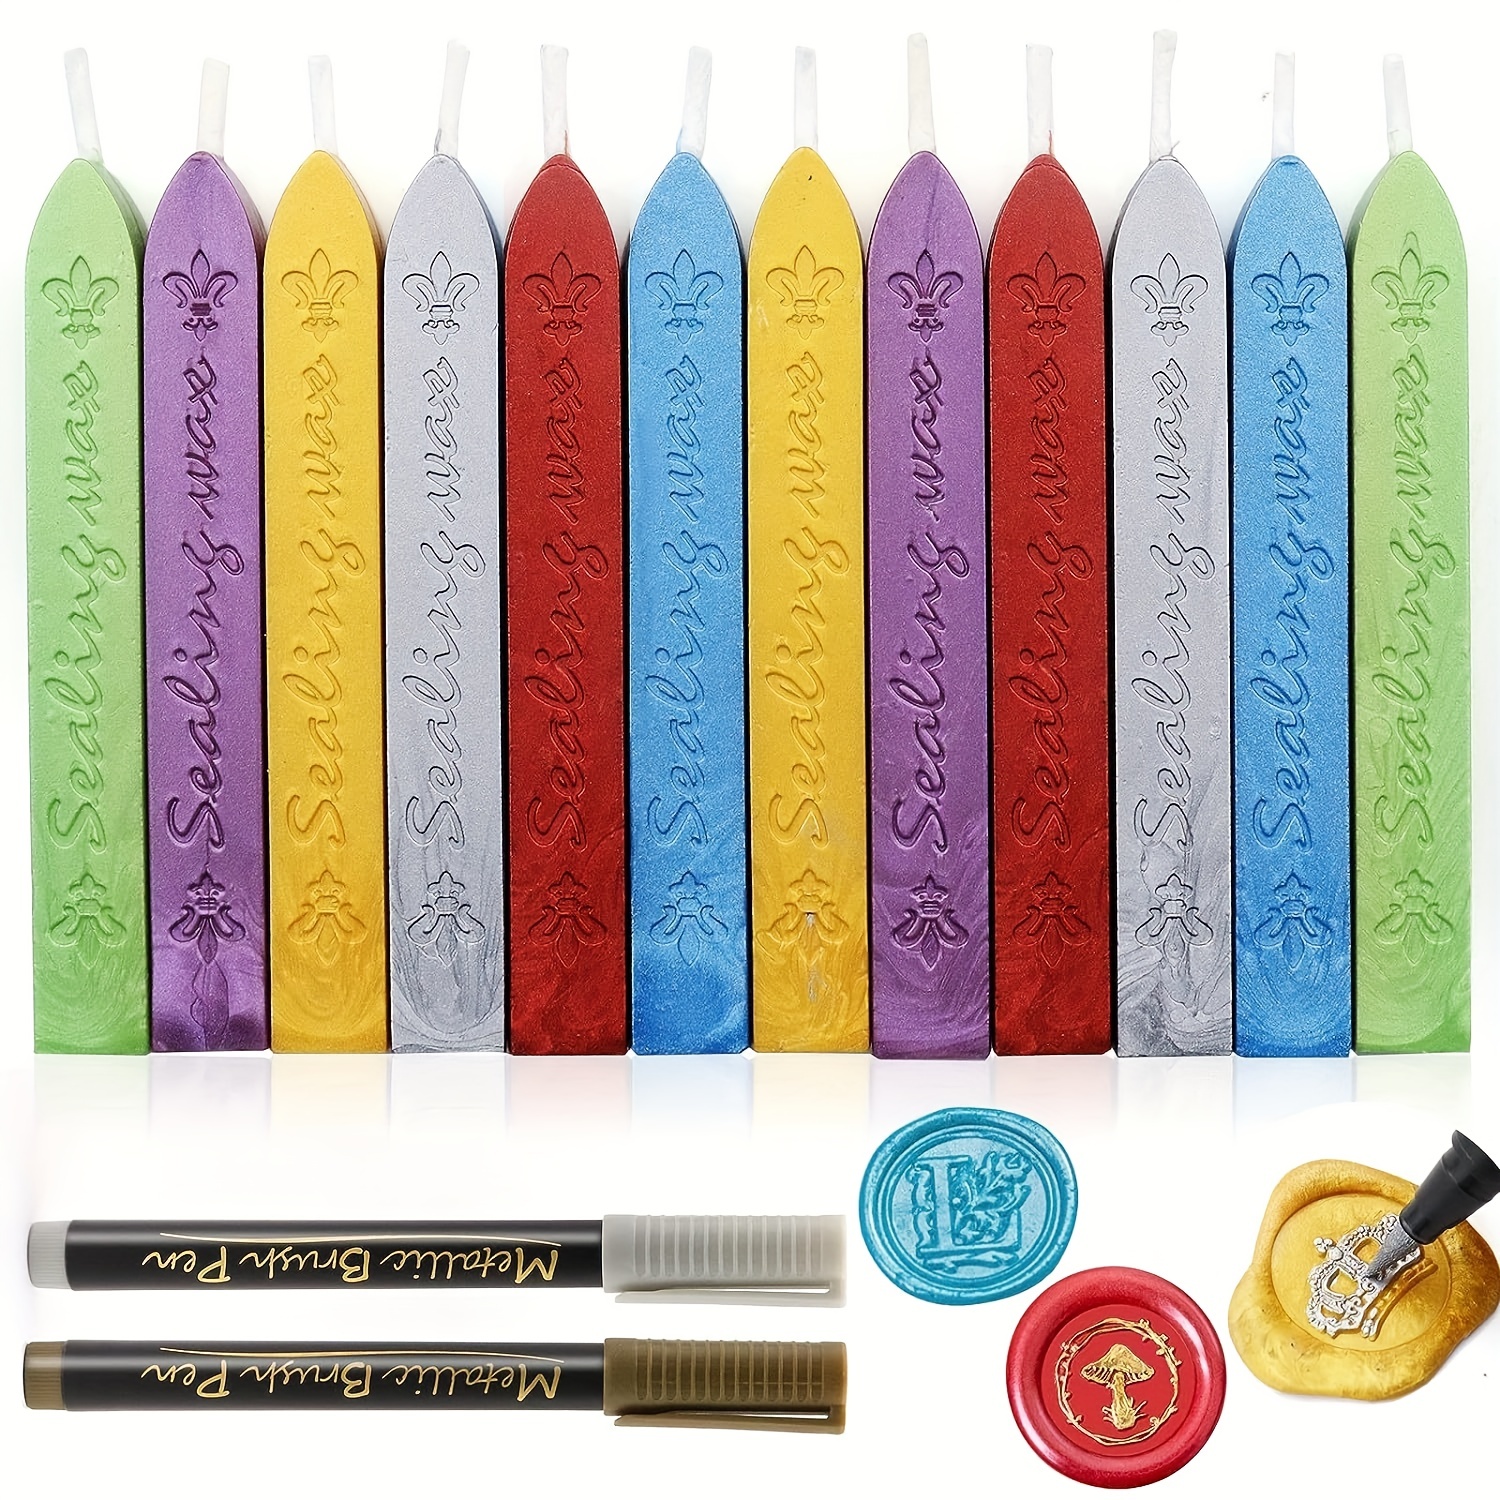 Bottle sealing wax & seals in standard, pearlescent and metallic finishes.